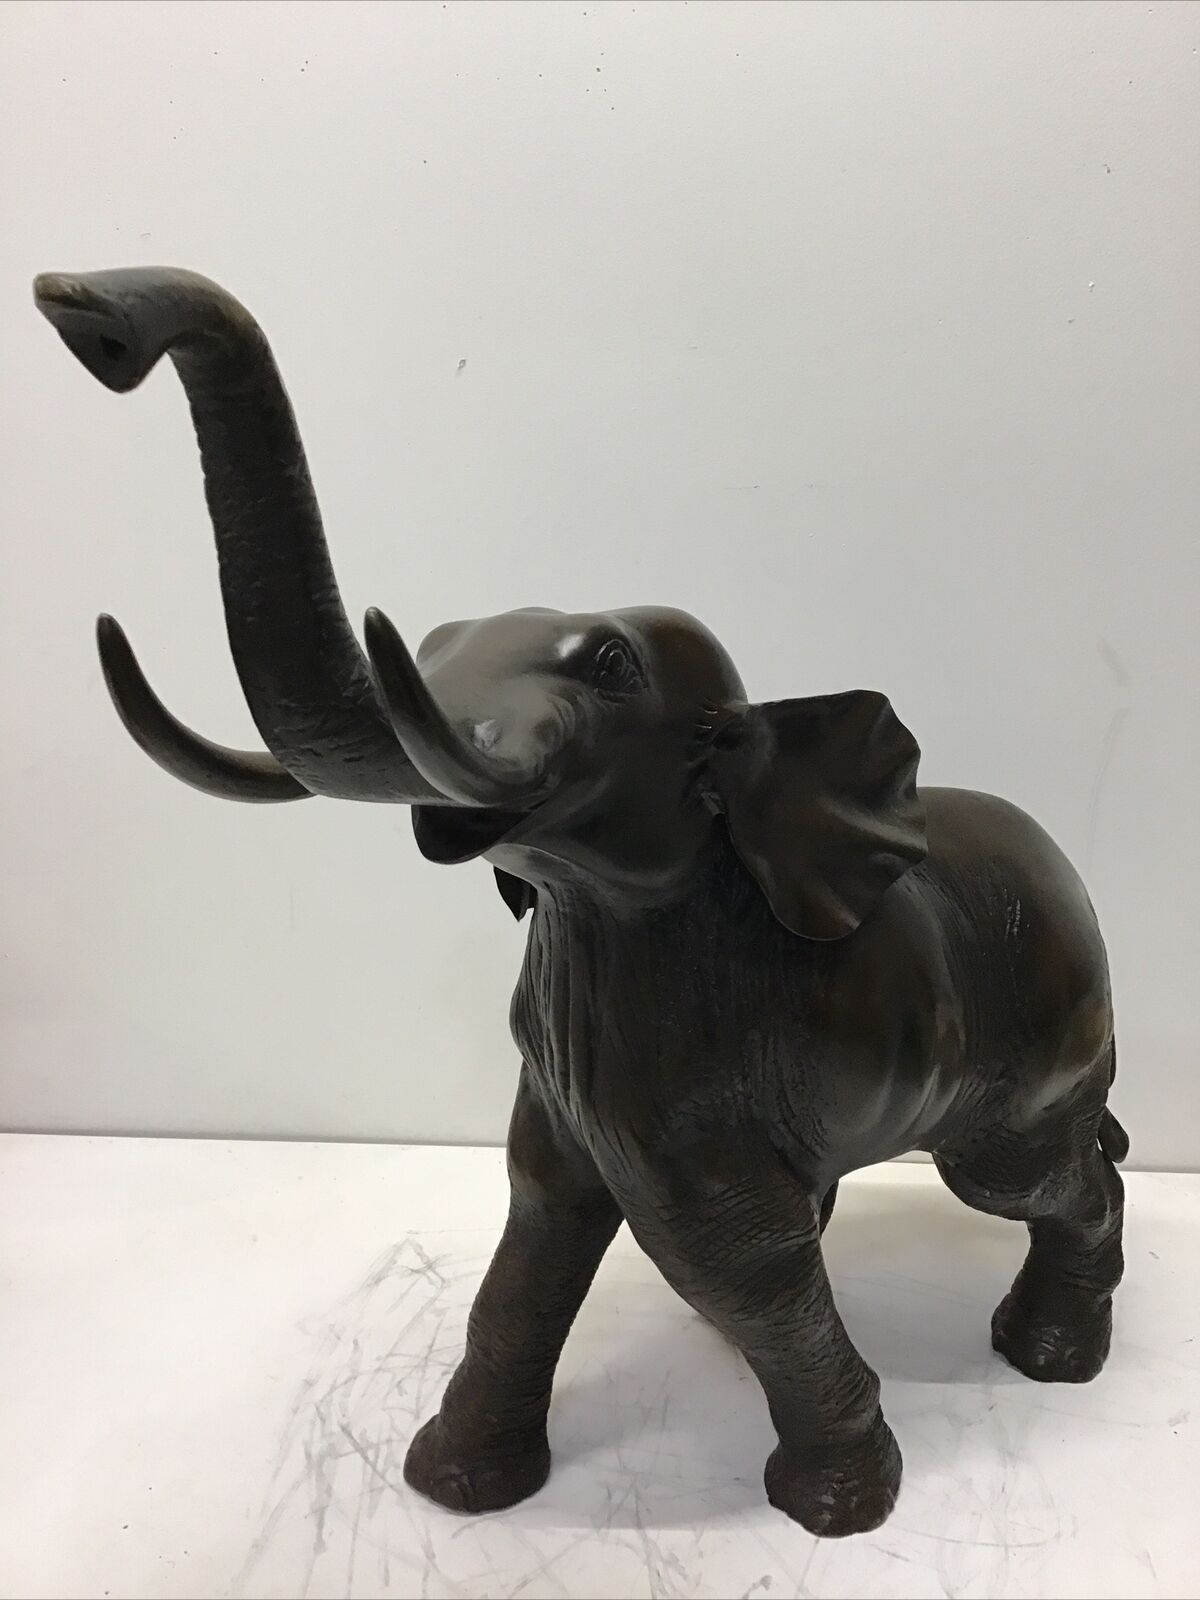 Large Cast Bronze Elephant Trunk Up 19.5” Tall, 20.5” Long - Over 21 Pounds